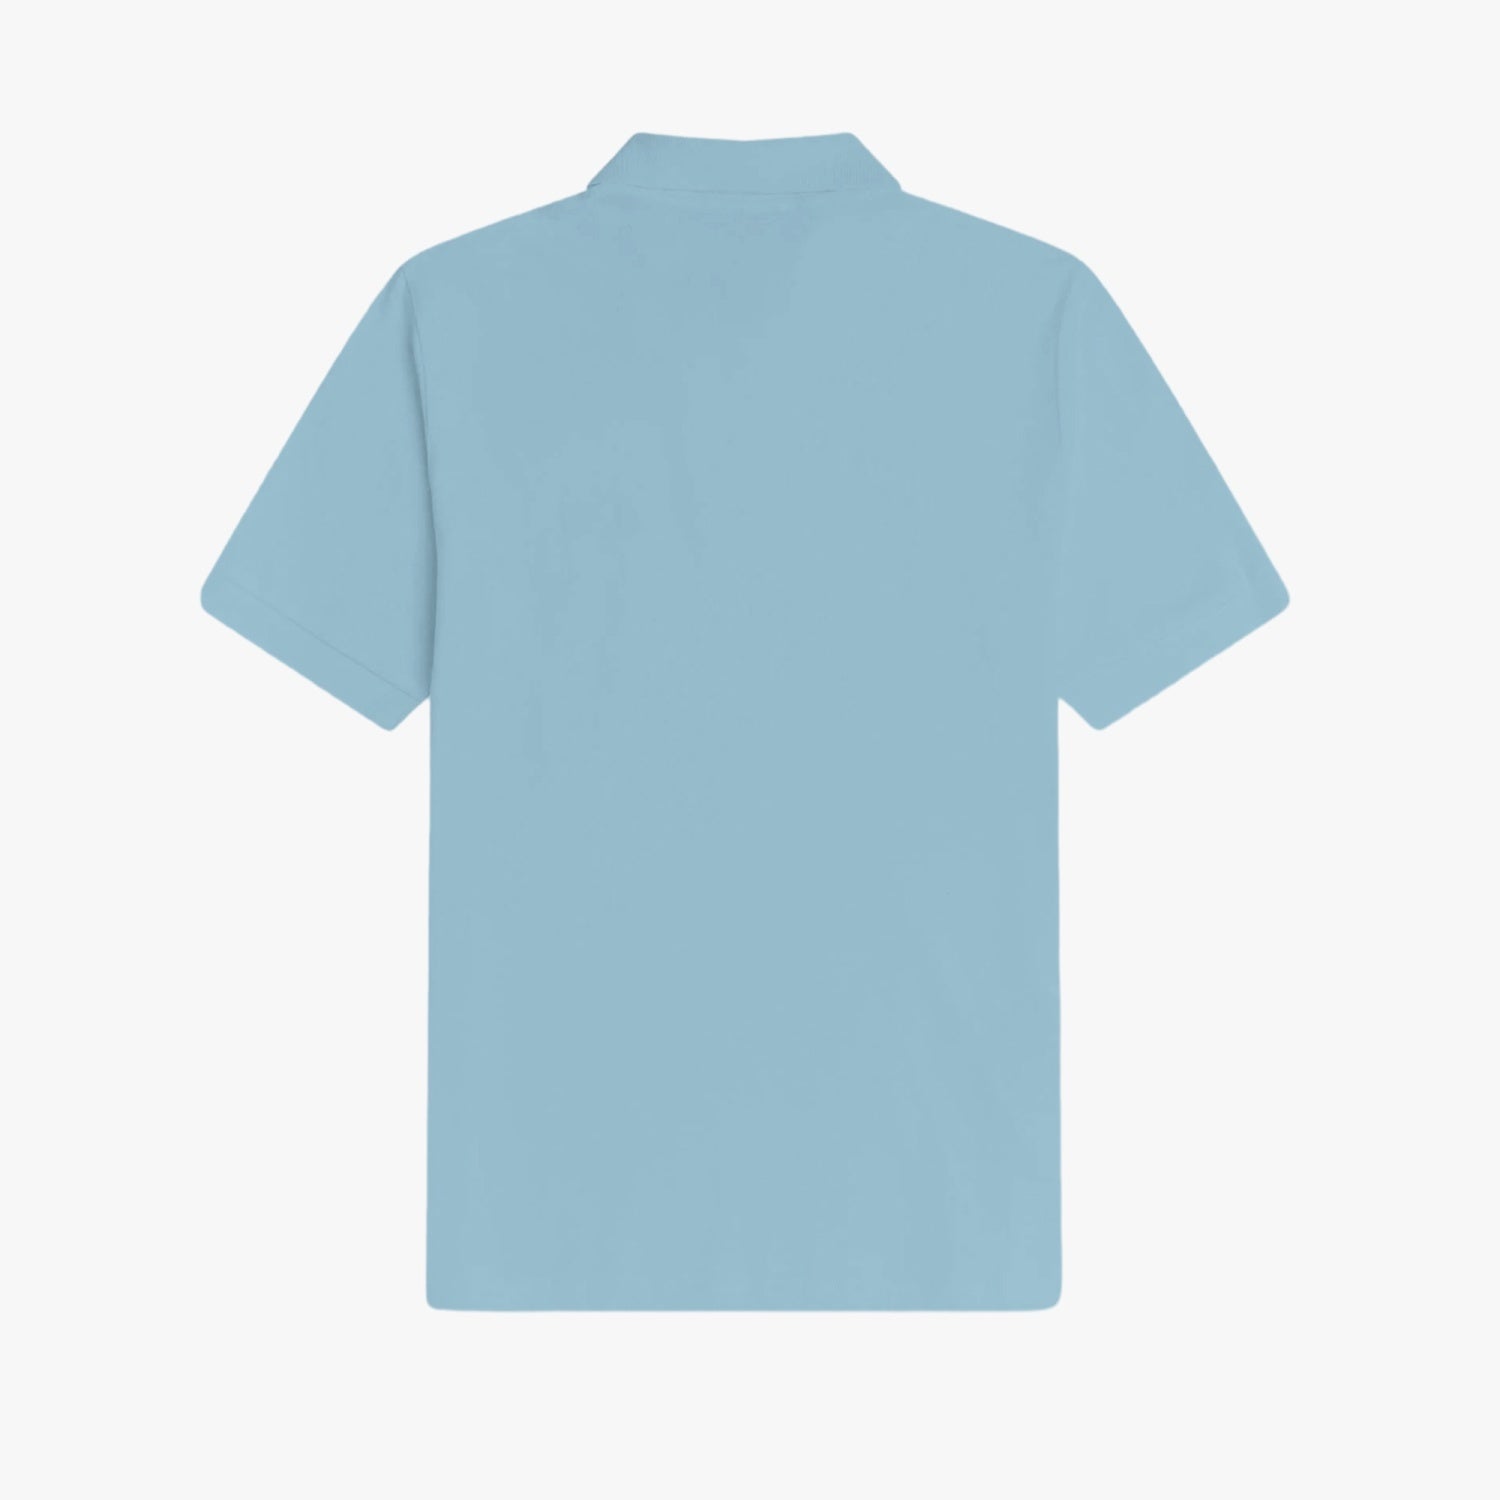 The cool Dad Sport Polo Shirt